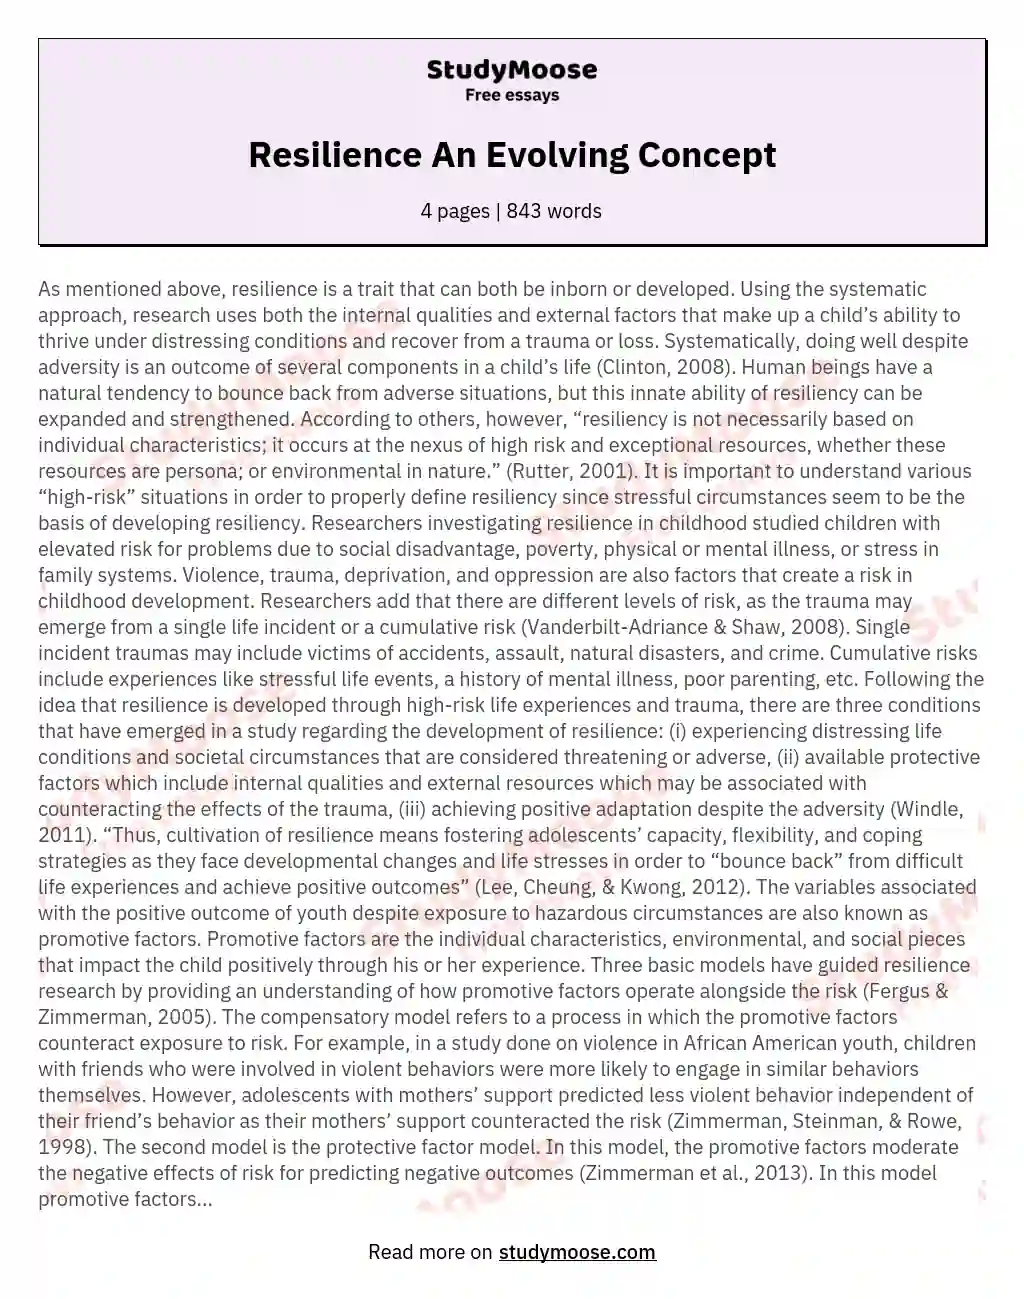 Resilience An Evolving Concept essay